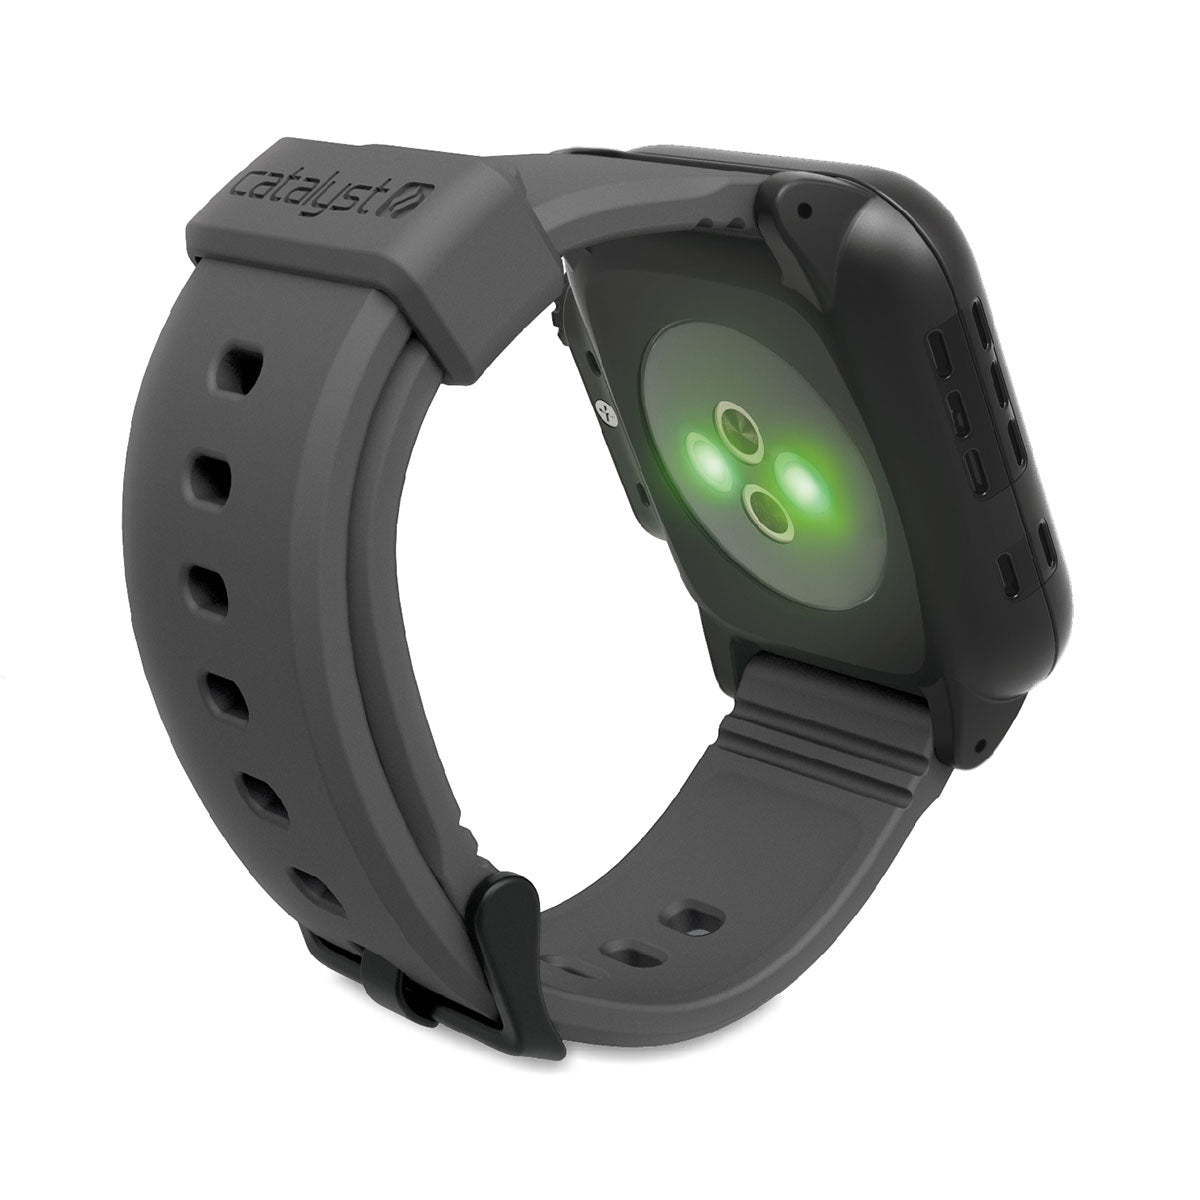 catalyst apple watch series 3 42mm waterproof case band showing the back of the catalyst case with green lights on the optic sensor with gray band